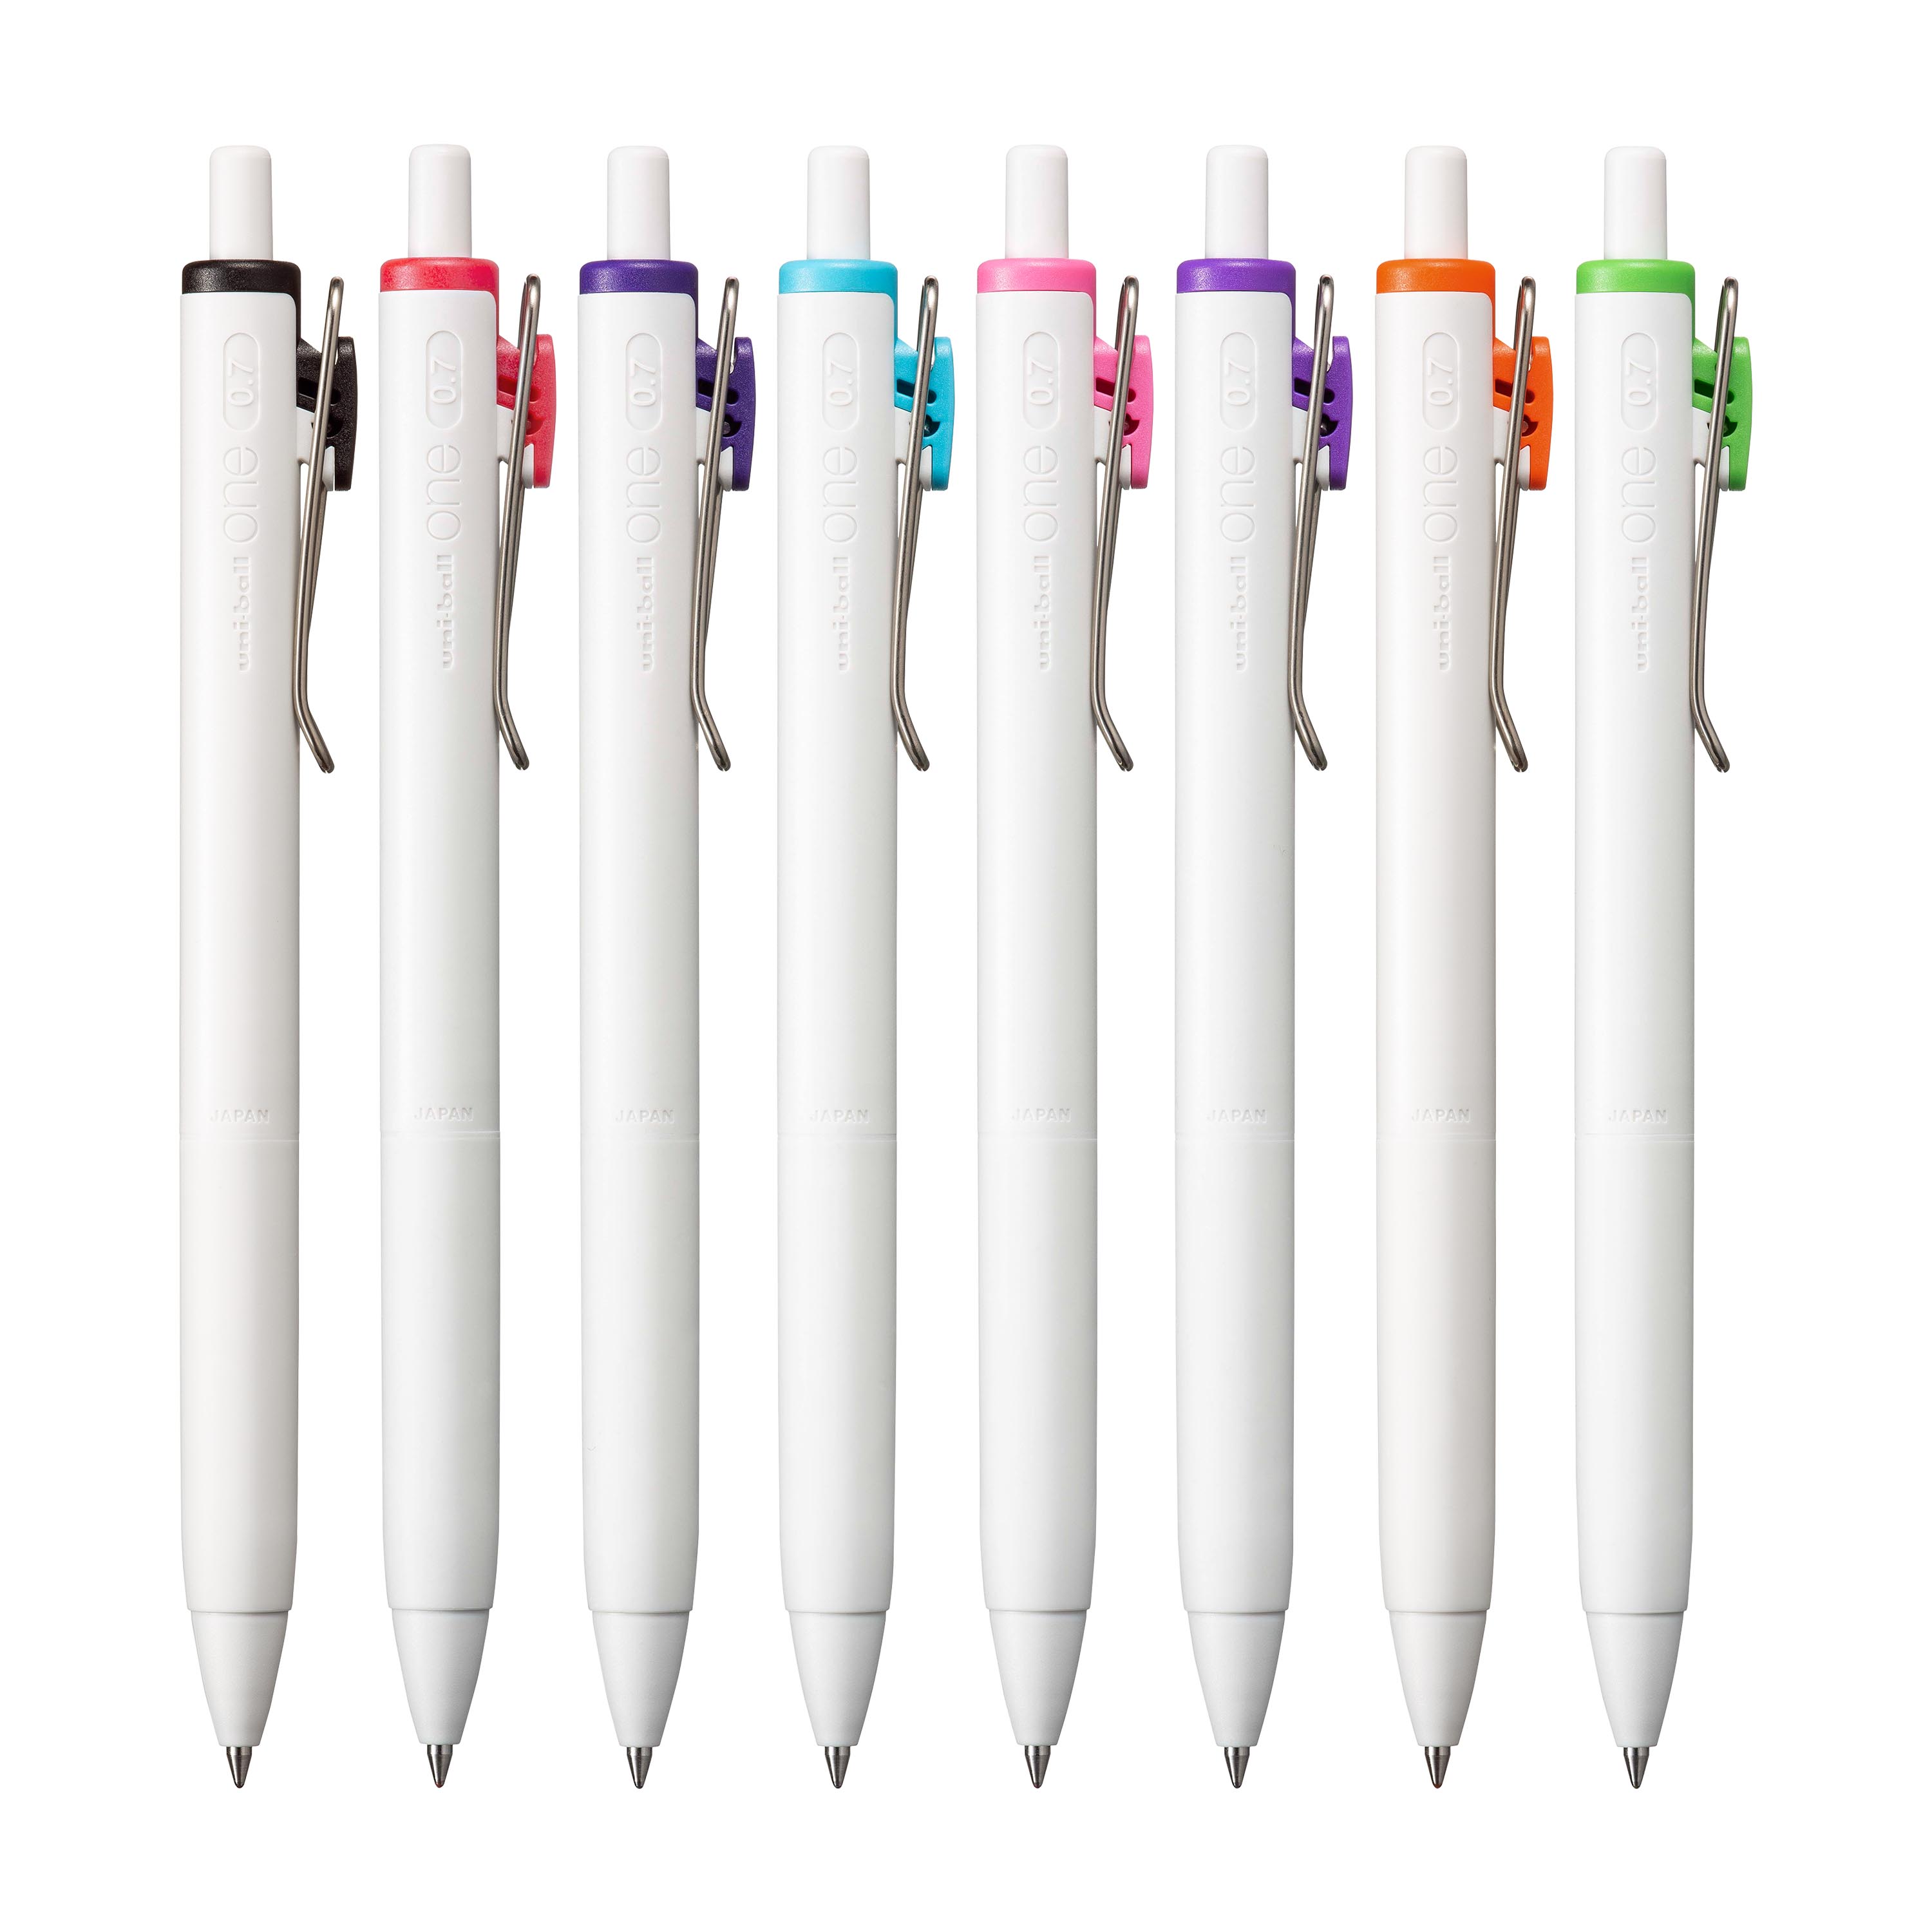 uniball™ one Retractable Gel Pens, Medium Point (0.7mm), Assorted Ink, 8 Pack